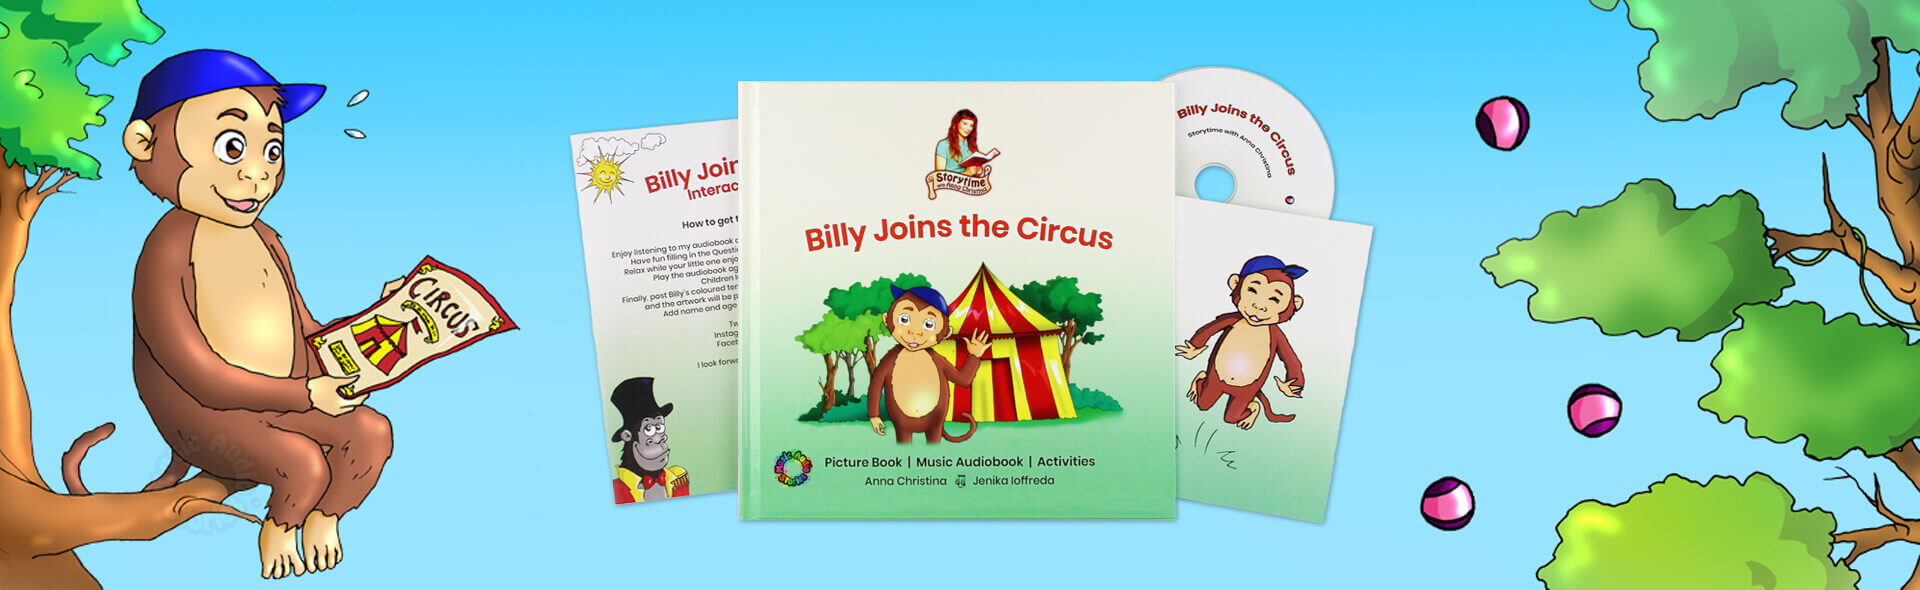 Billy Joins the Circus limited first edition picture book